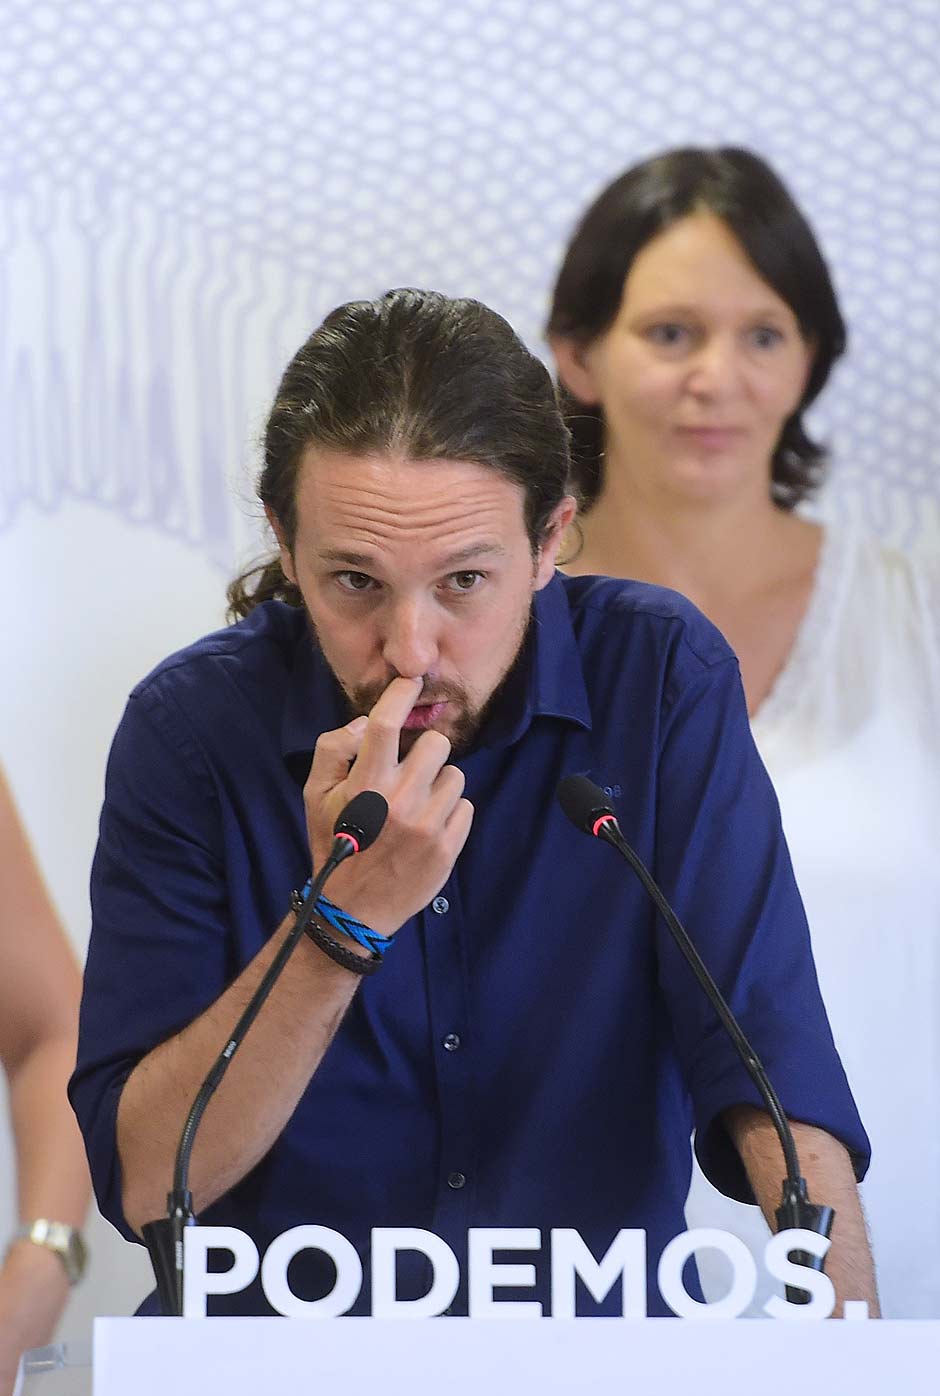 Spanish Euro Deputy and leader of left-wing protest party Podemos Pablo Iglesias gestures at a press conference during a meeting of the party's coordination board at it's headquarters in Madrid on August 24, 2015. AFP PHOTO / PIERRE-PHILIPPE MARCOU ORG XMIT: PPM401